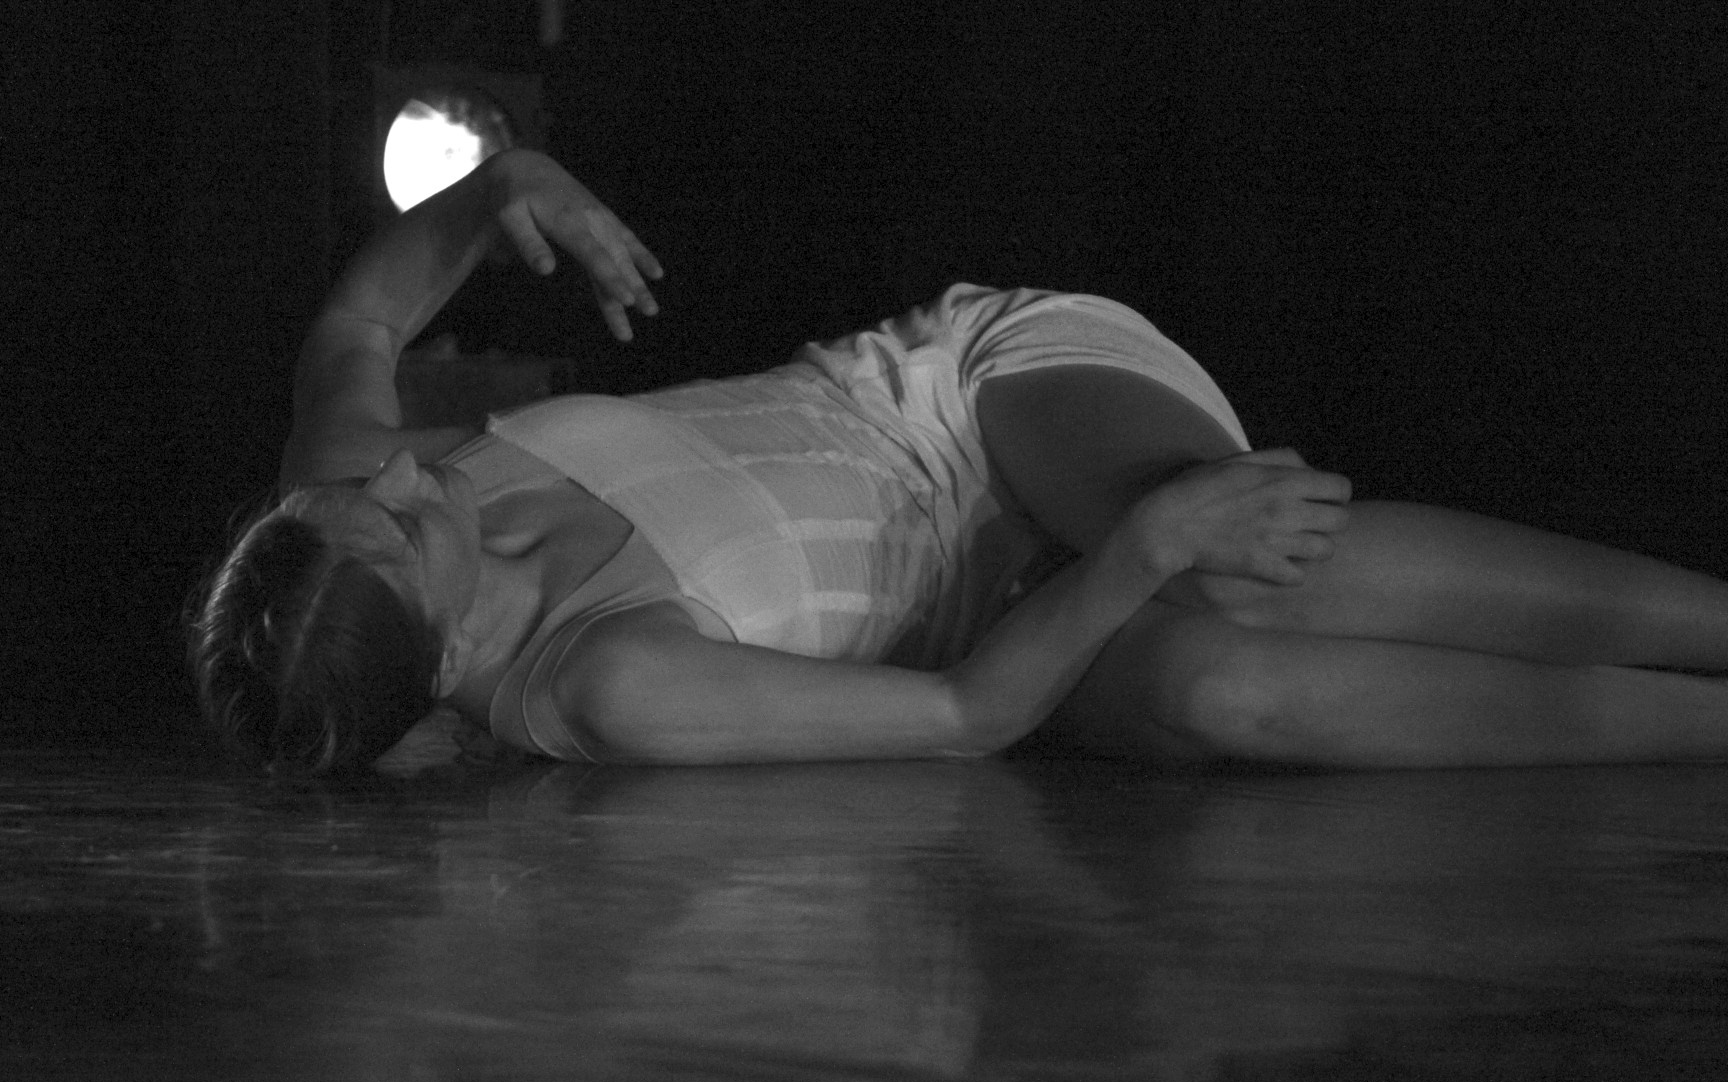 2012 Faculty Dance Concert, Convergence by Patrizia Herminjard <span class="cc-gallery-credit"></span>